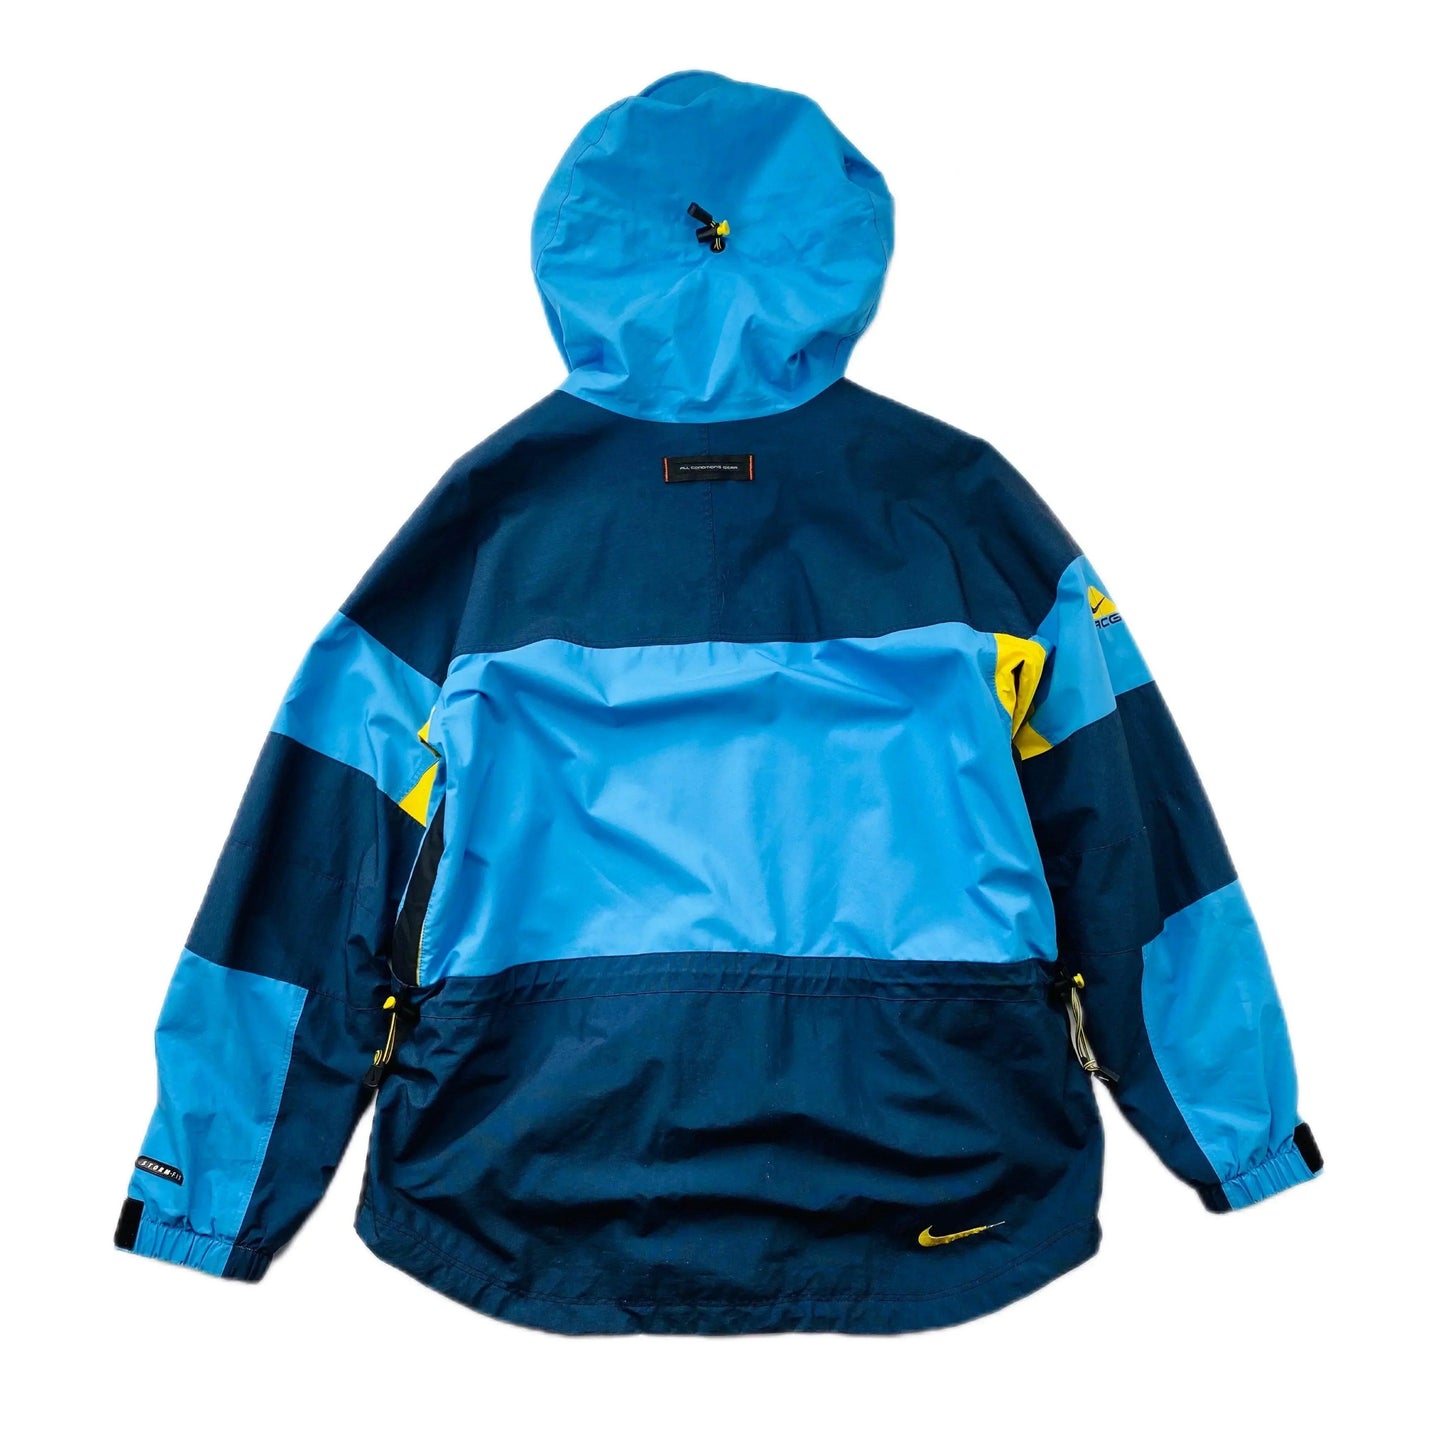 NIKE ACG WINTER GAMES 1998 STORM FIT JACKET (M) - Known Source